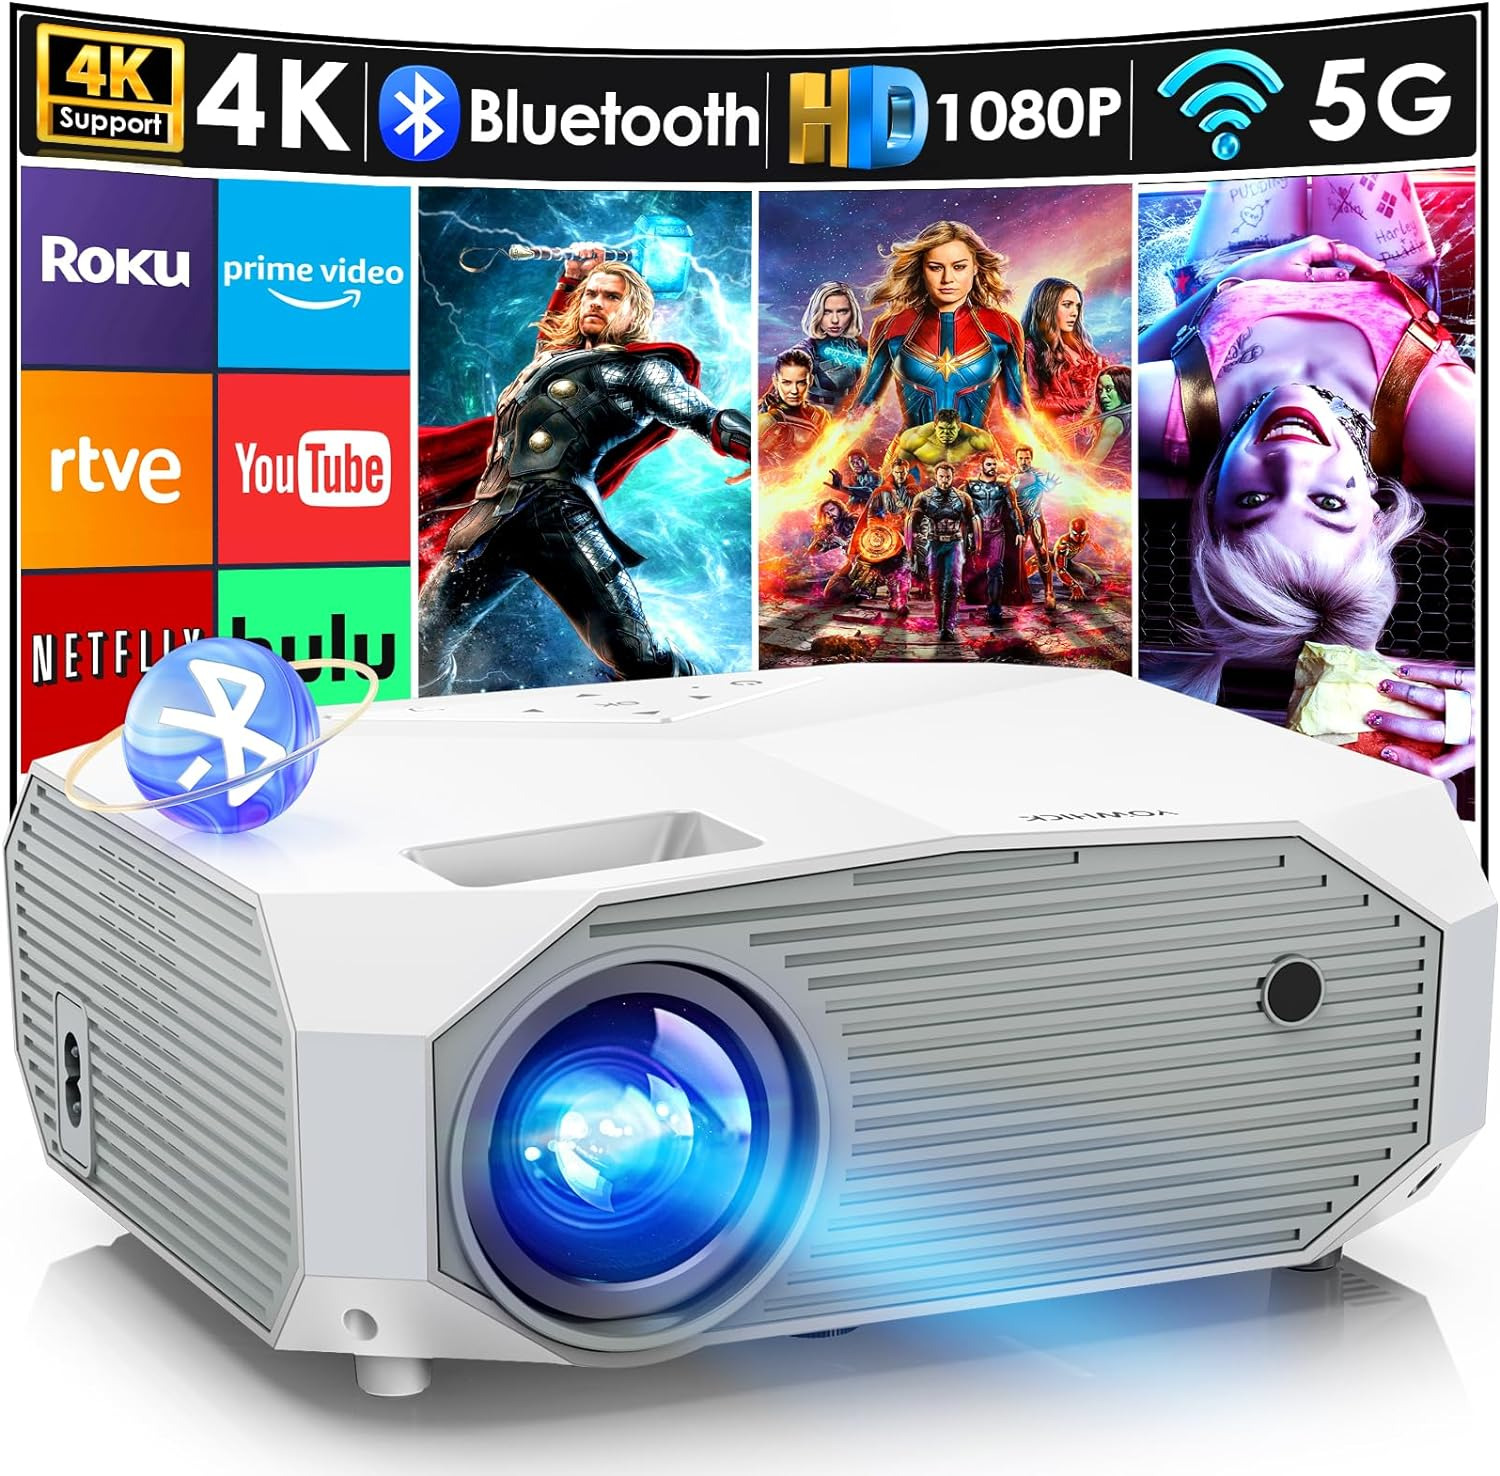 Video Movie Projector 5G Wifi Bluetooth 1080P Outdoor 4K Home Theater 